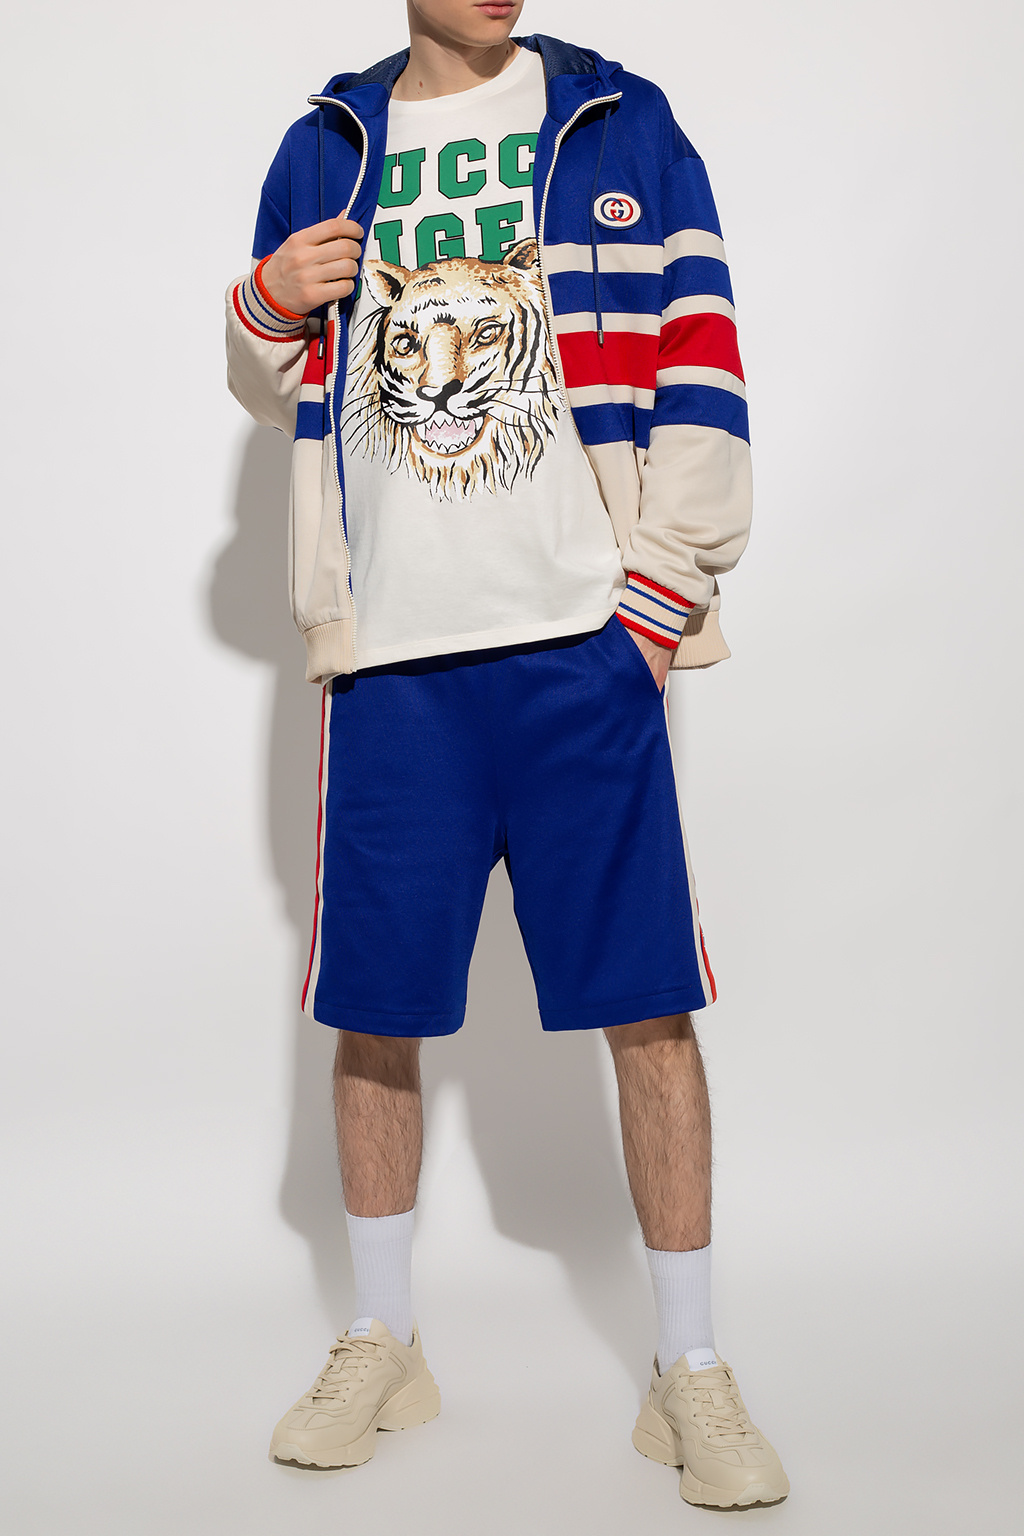 Gucci Shorts from the 'Gucci collection | Men's Clothing | Vitkac